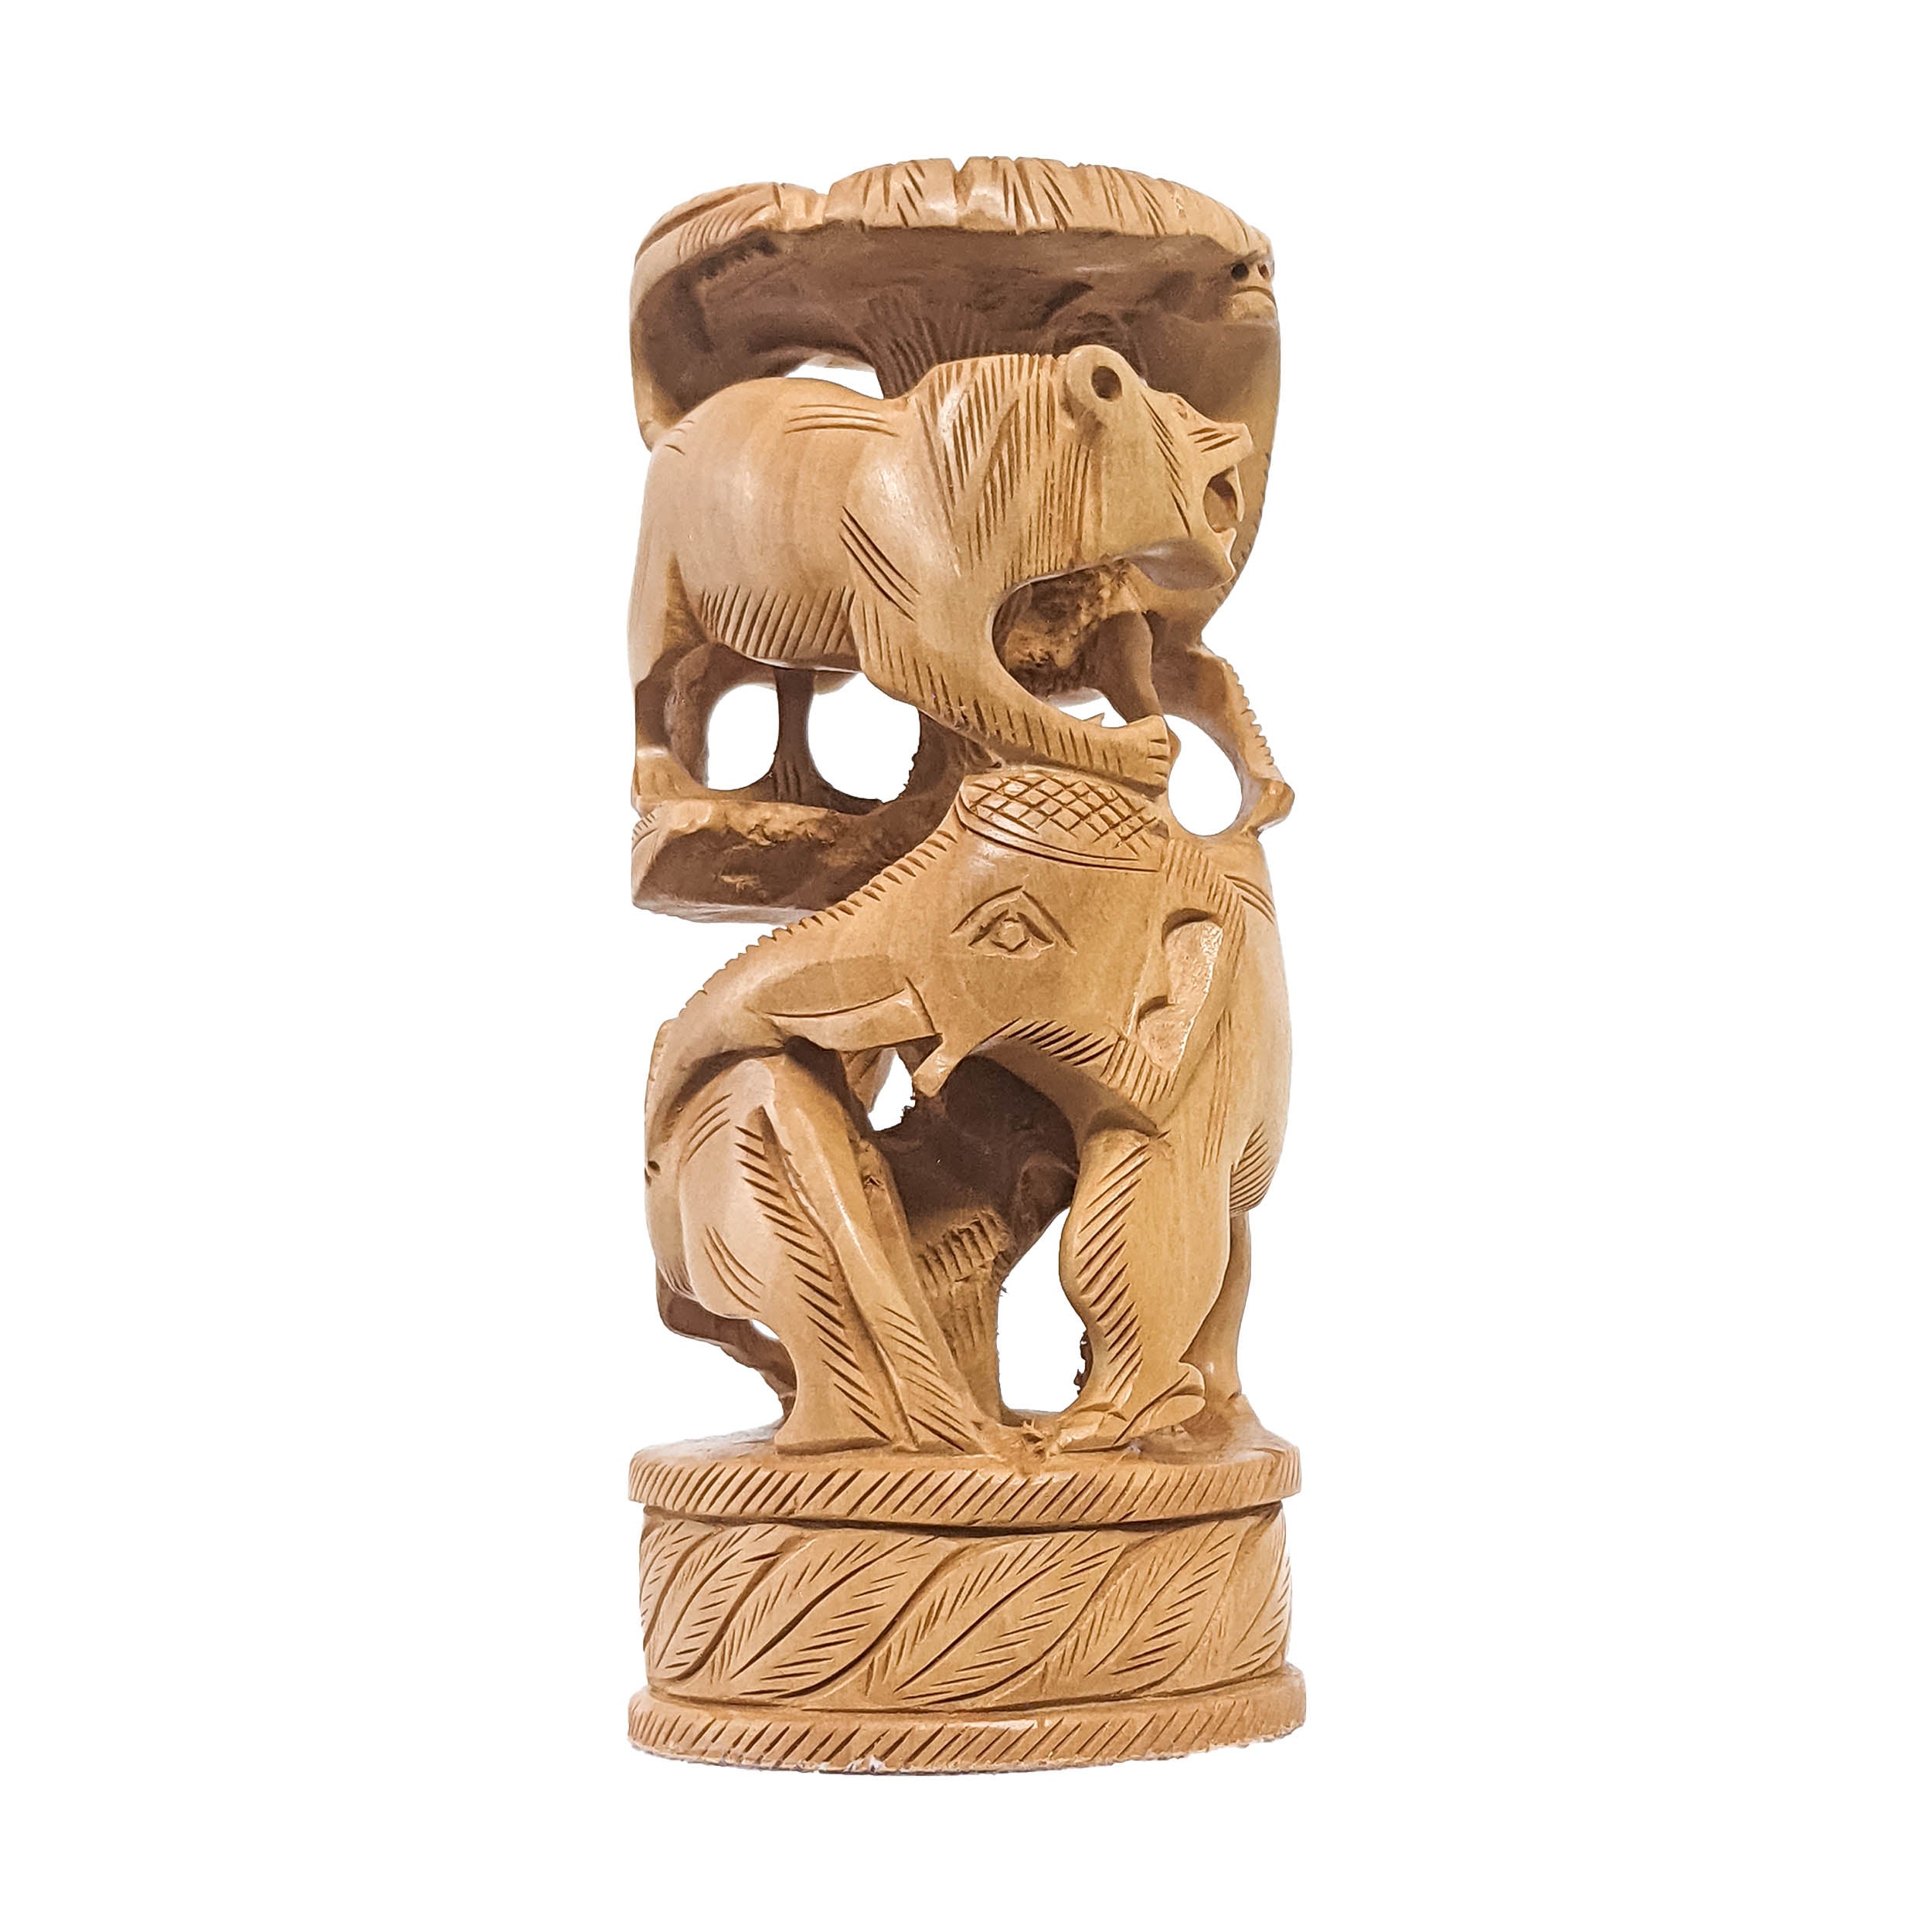 Add a Whimsical Touch to Your Home with Wooden Animal Mix Statue